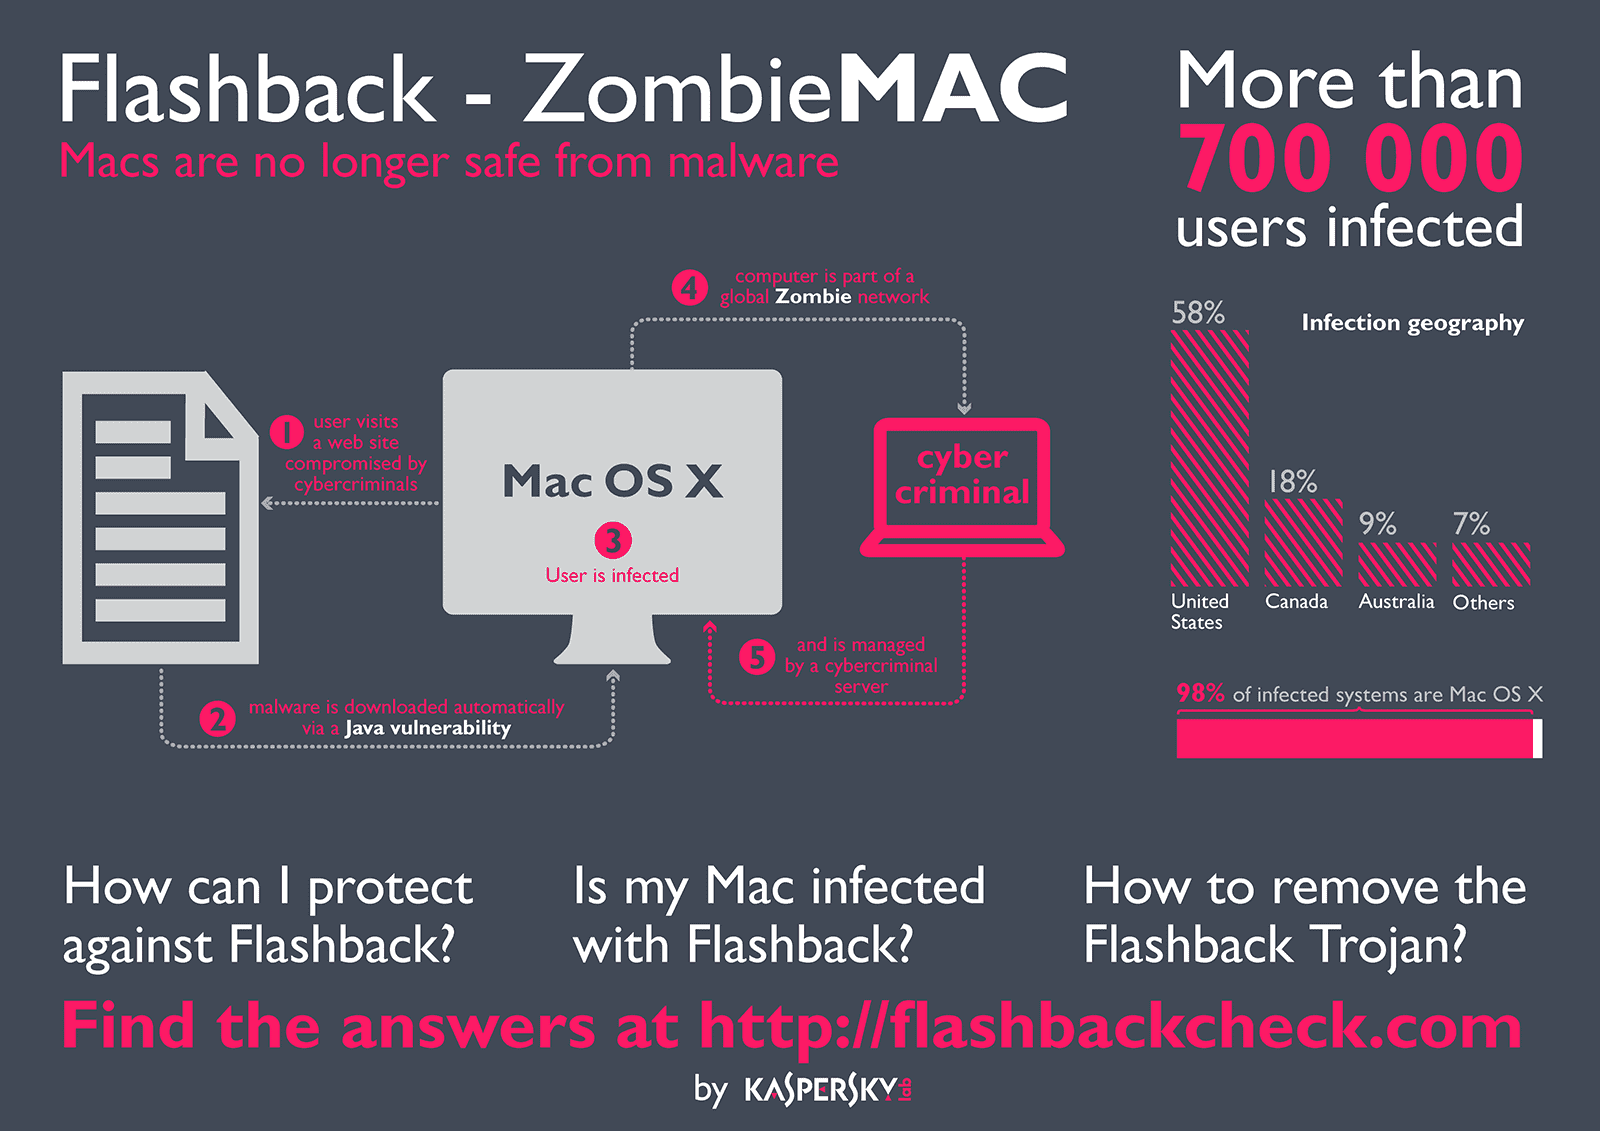 https://www.kaspersky.nl/content/nl-nl/images/repository/isc/infographics-zombie-mac-10-147134.png